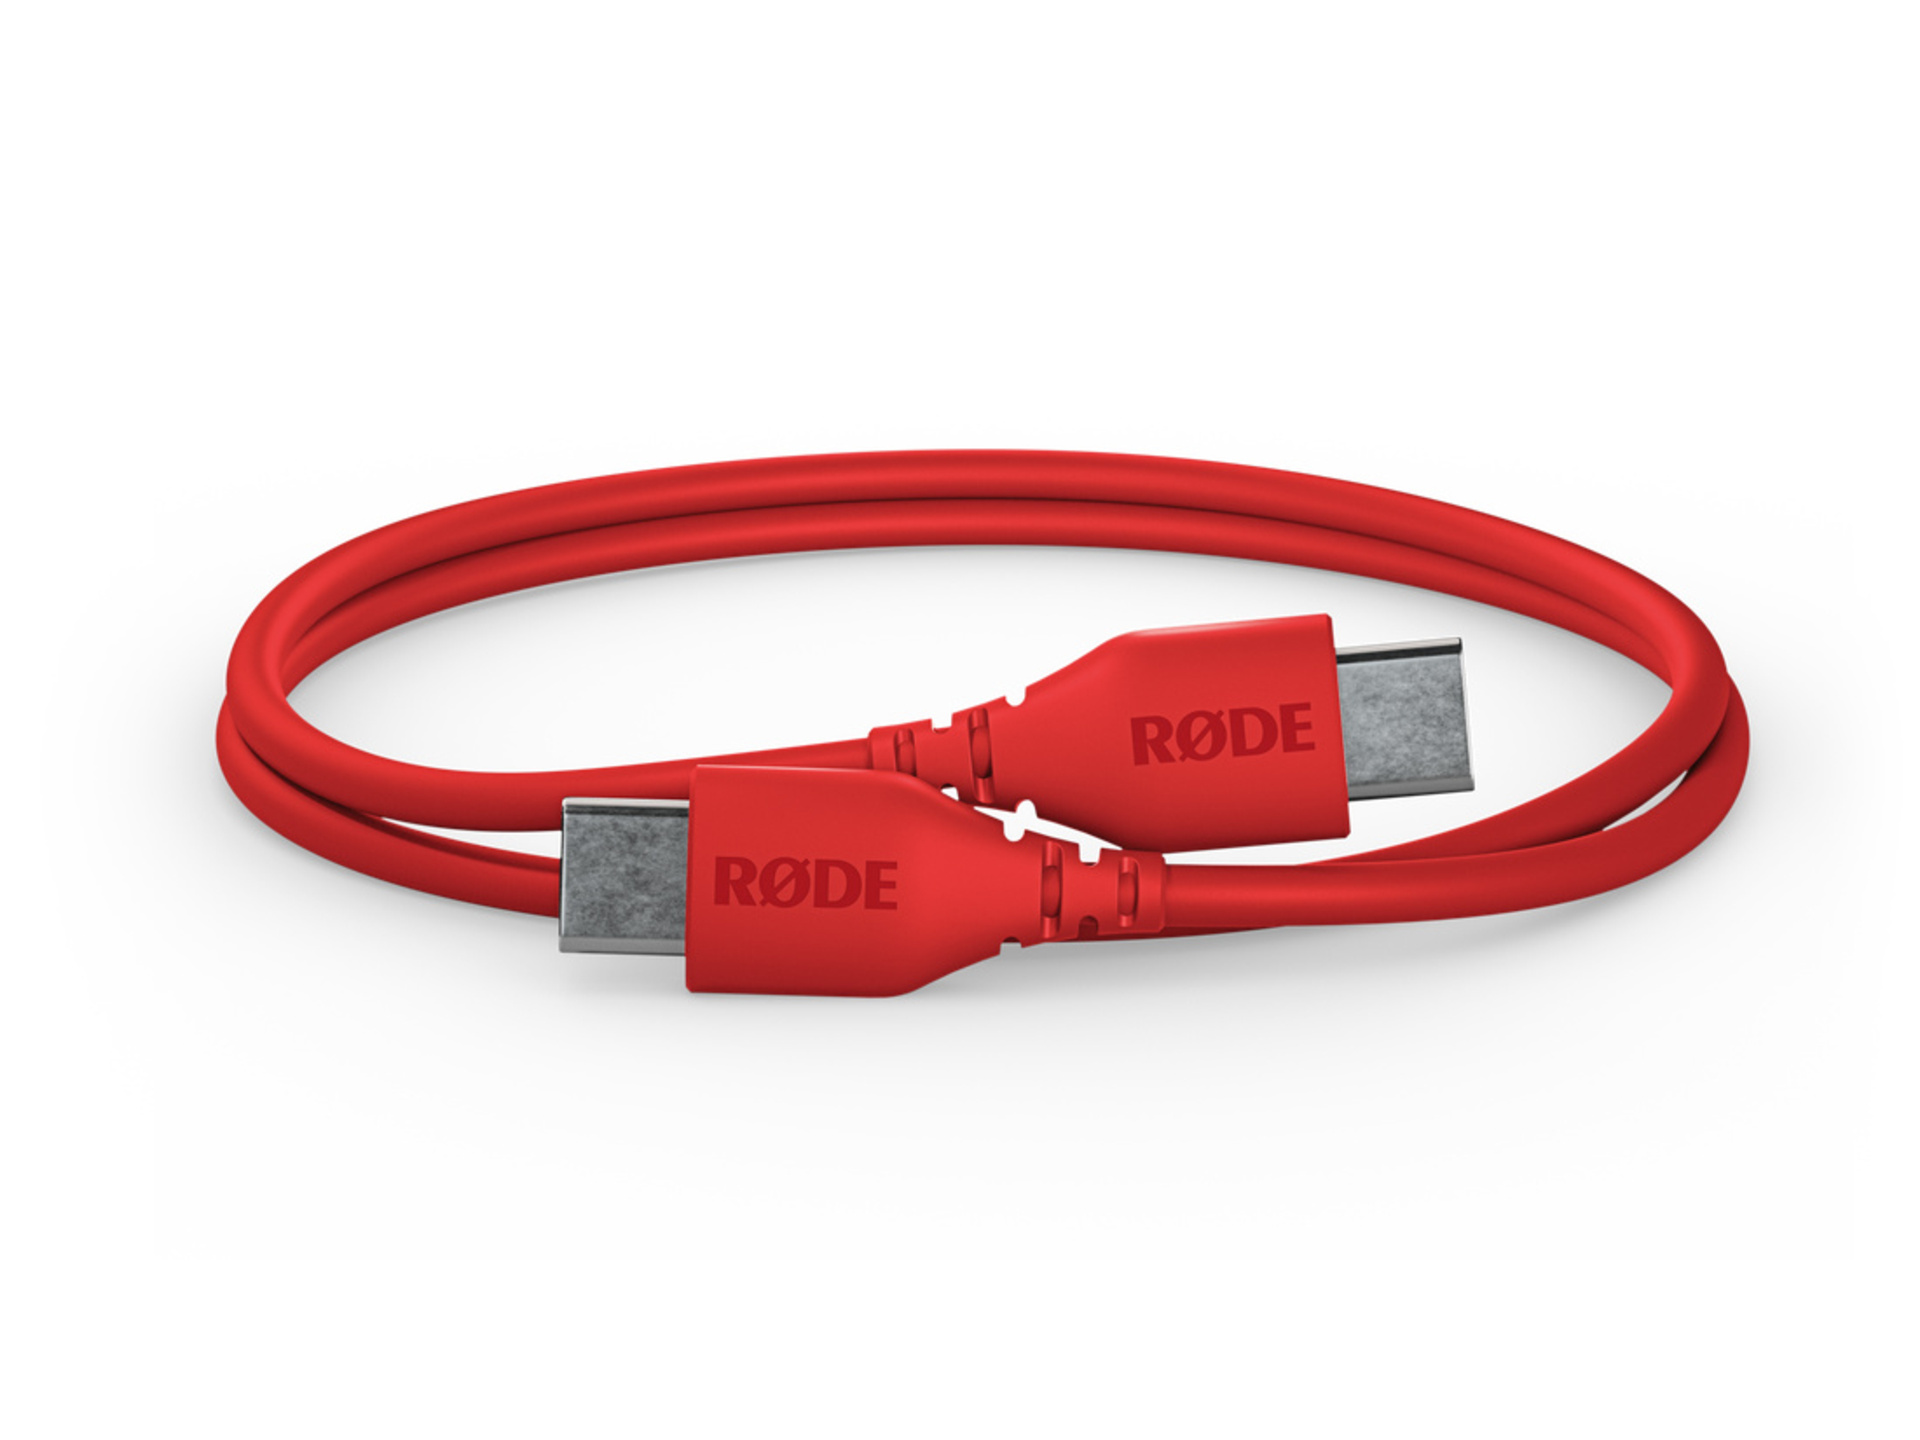 RODE SC22 USB-C to USB-C Cable (30cm, Red)